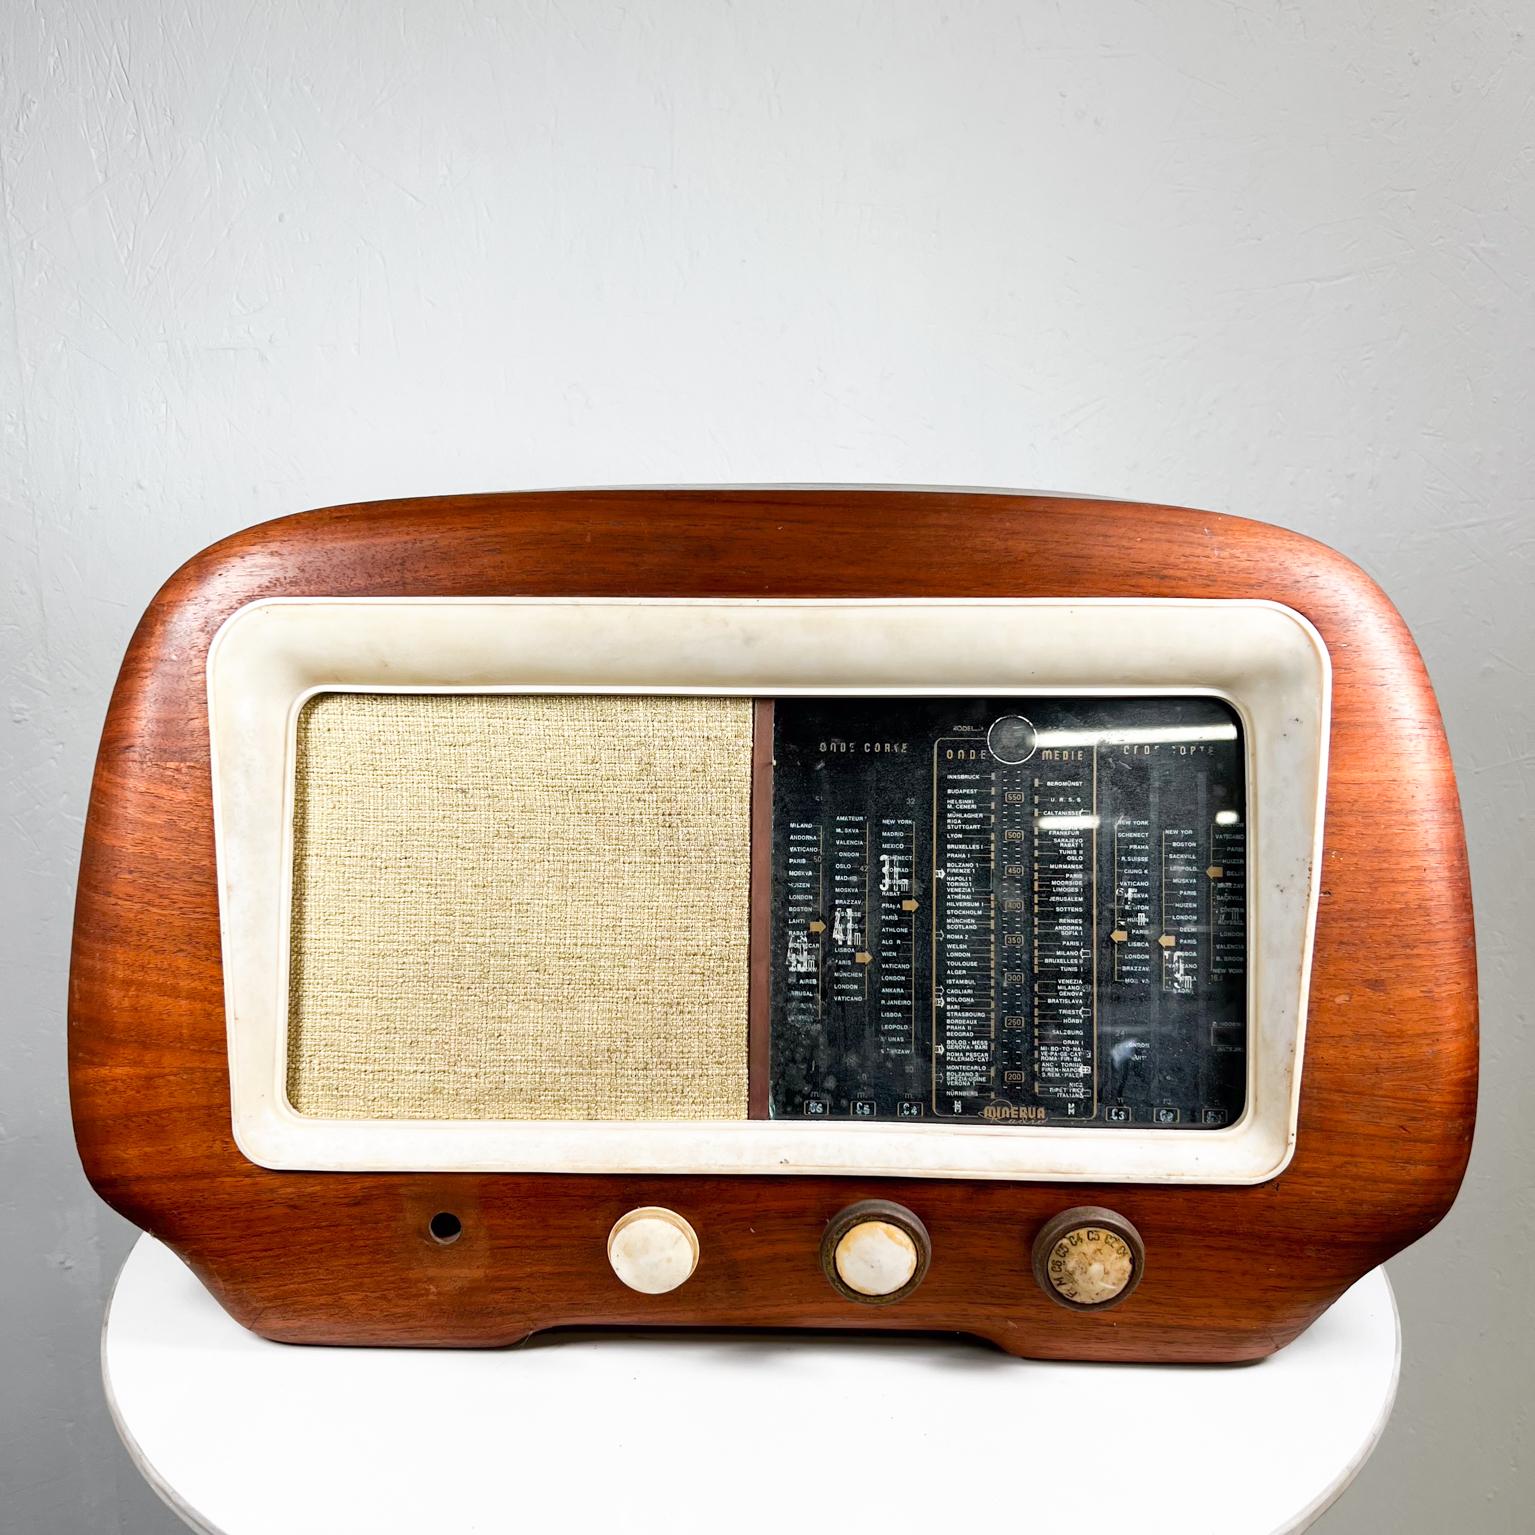 1950s Italian Modern Minerva Milano Short Wave Wood Radio
8.5 d x 22.63 w x 10. H
Preowned untested unrestored vintage condition. 
Missing parts. See all images.
Decorative display use only.
